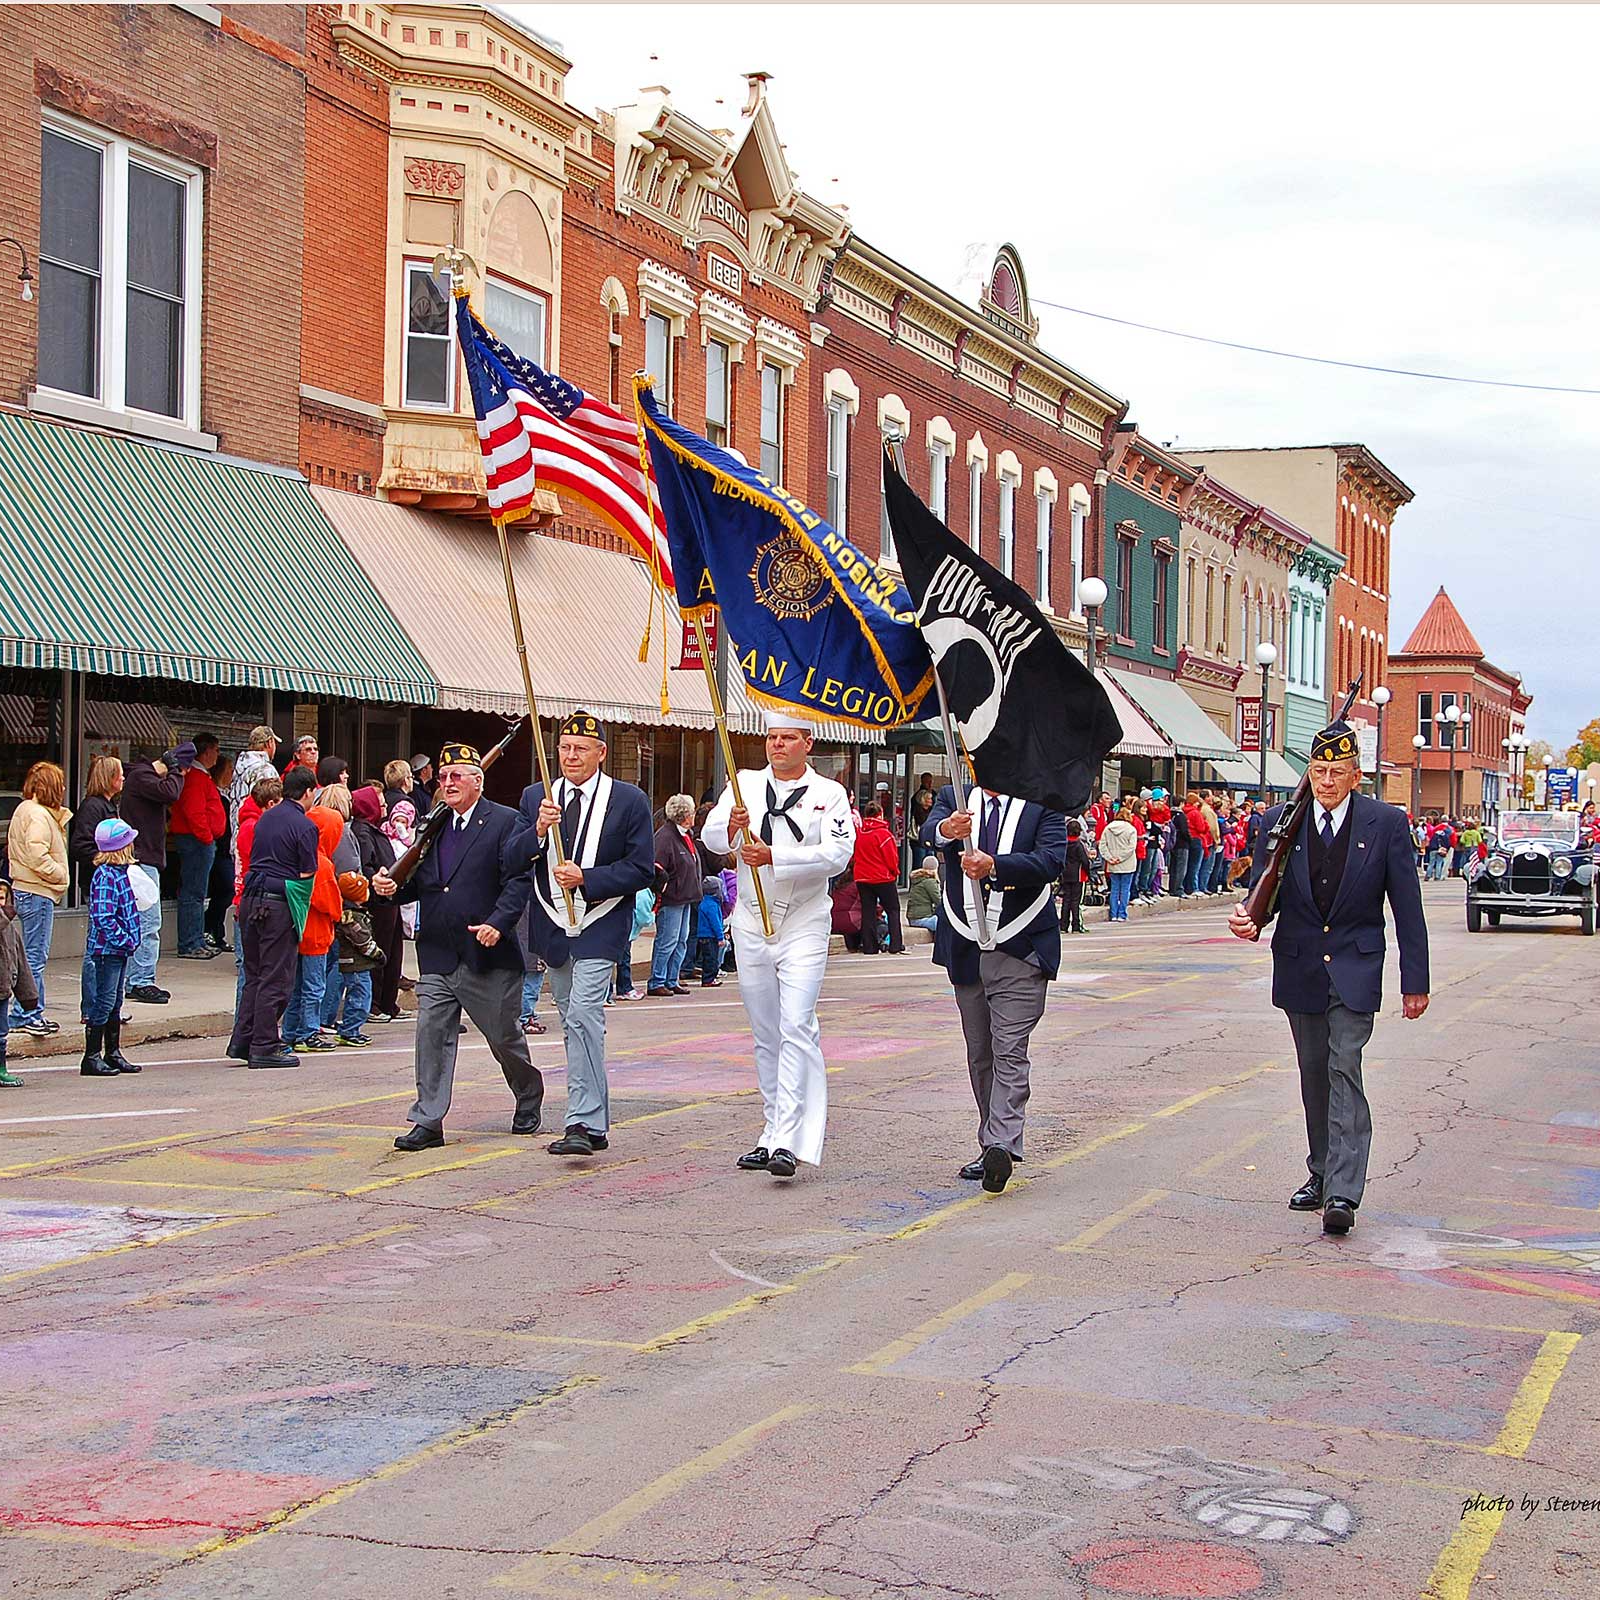 veterans march down main street carrying flags and leading a parade